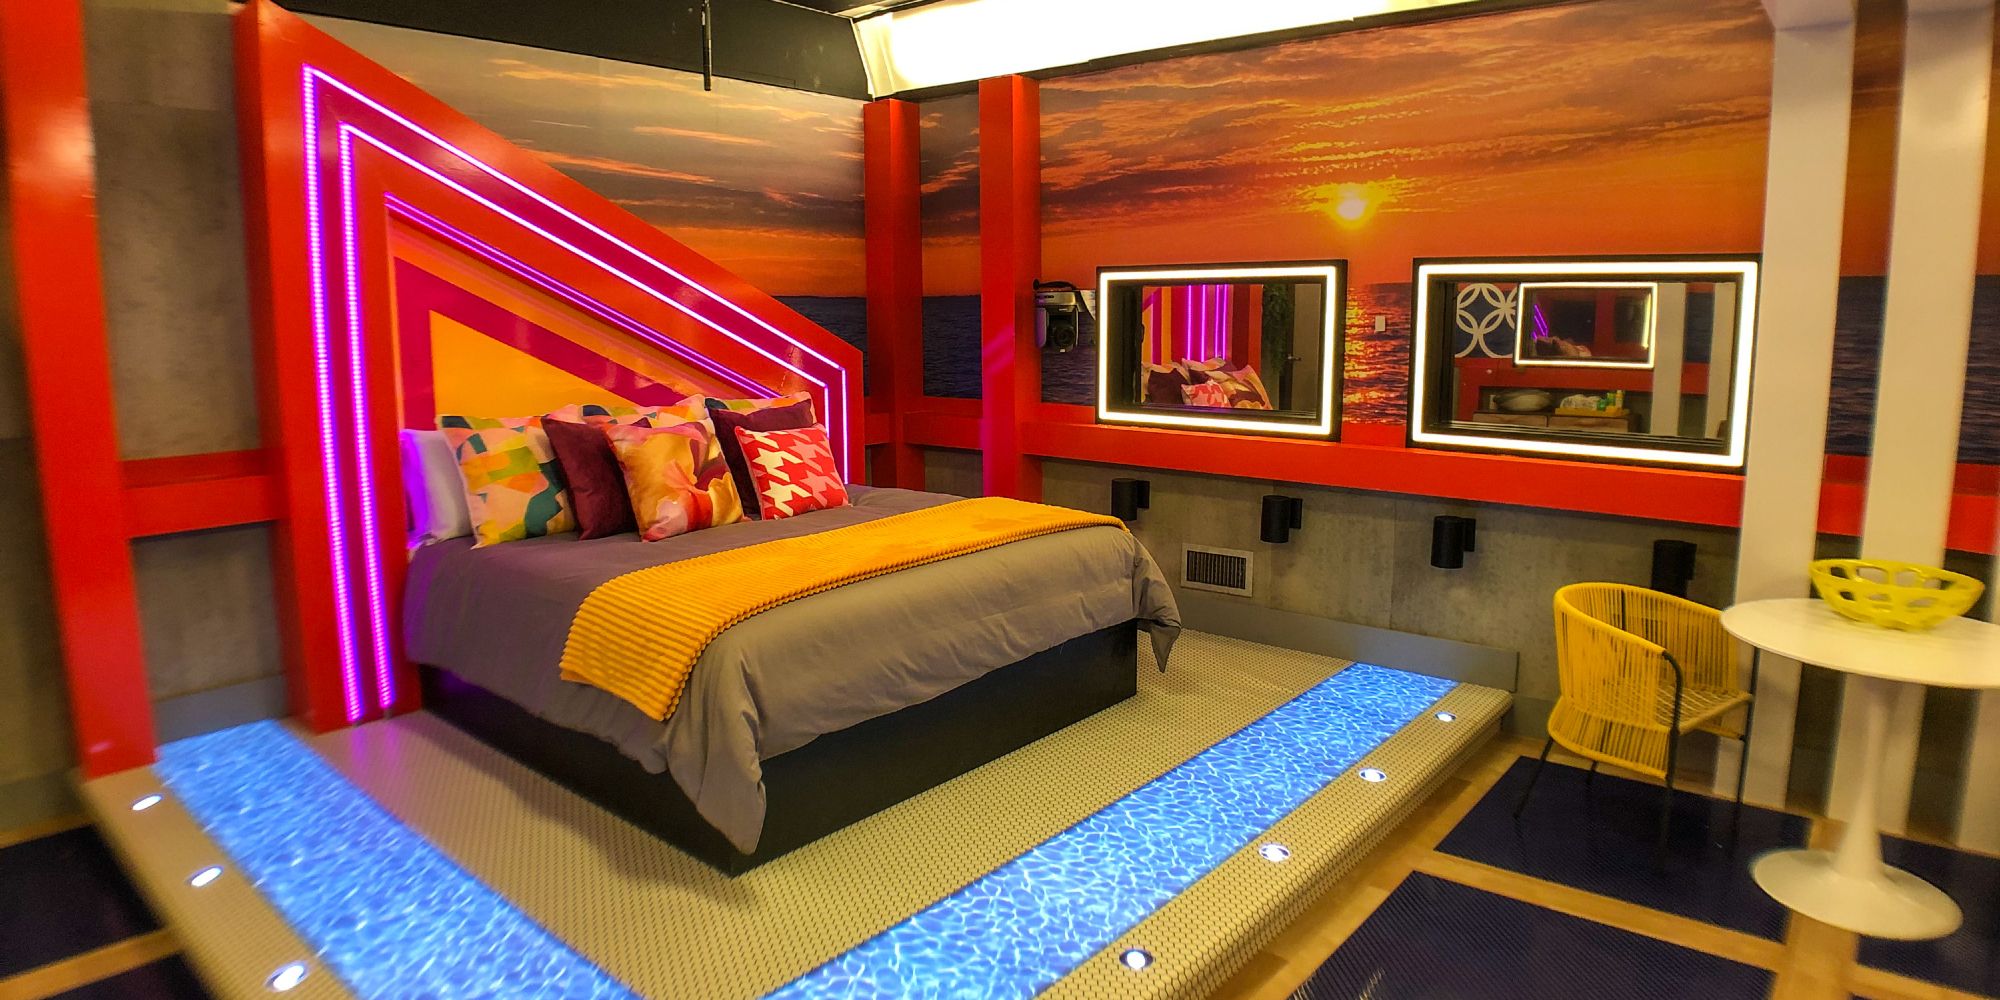 The Head of Household room is unoccupied and tidy on Big Brother.